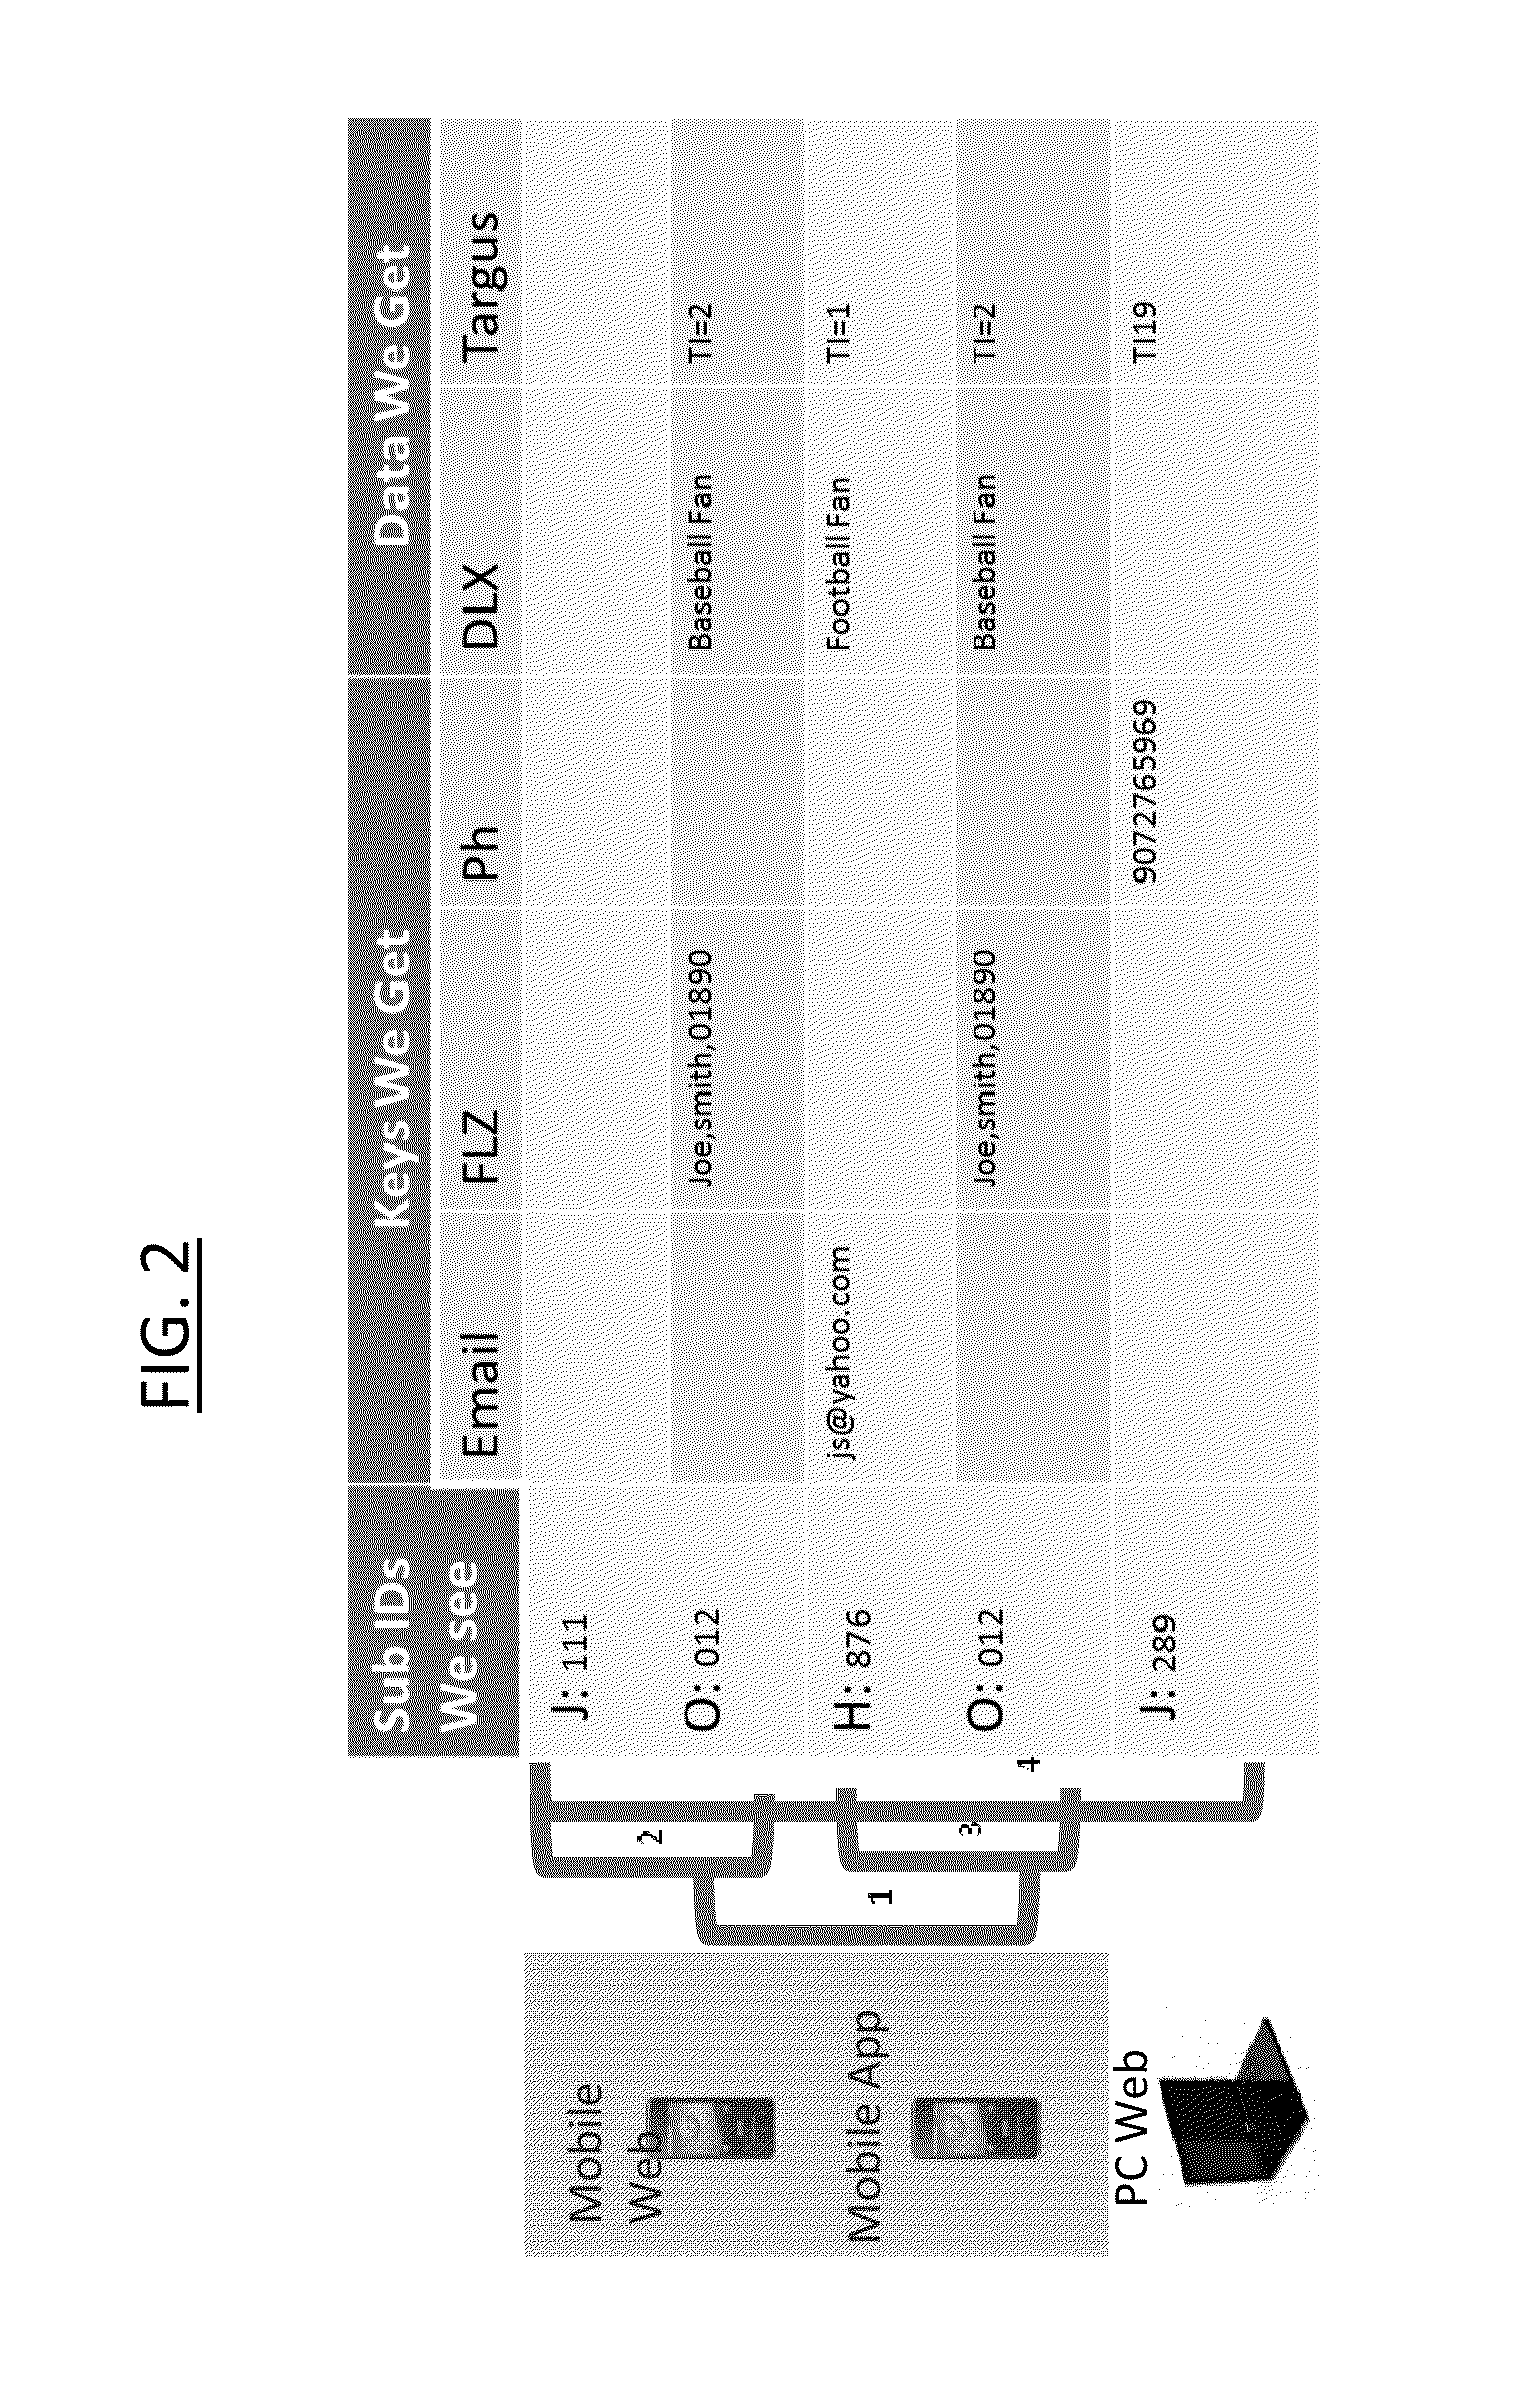 System for determining interests of users of mobile and nonmobile communication devices based on data received from a plurality of data providers